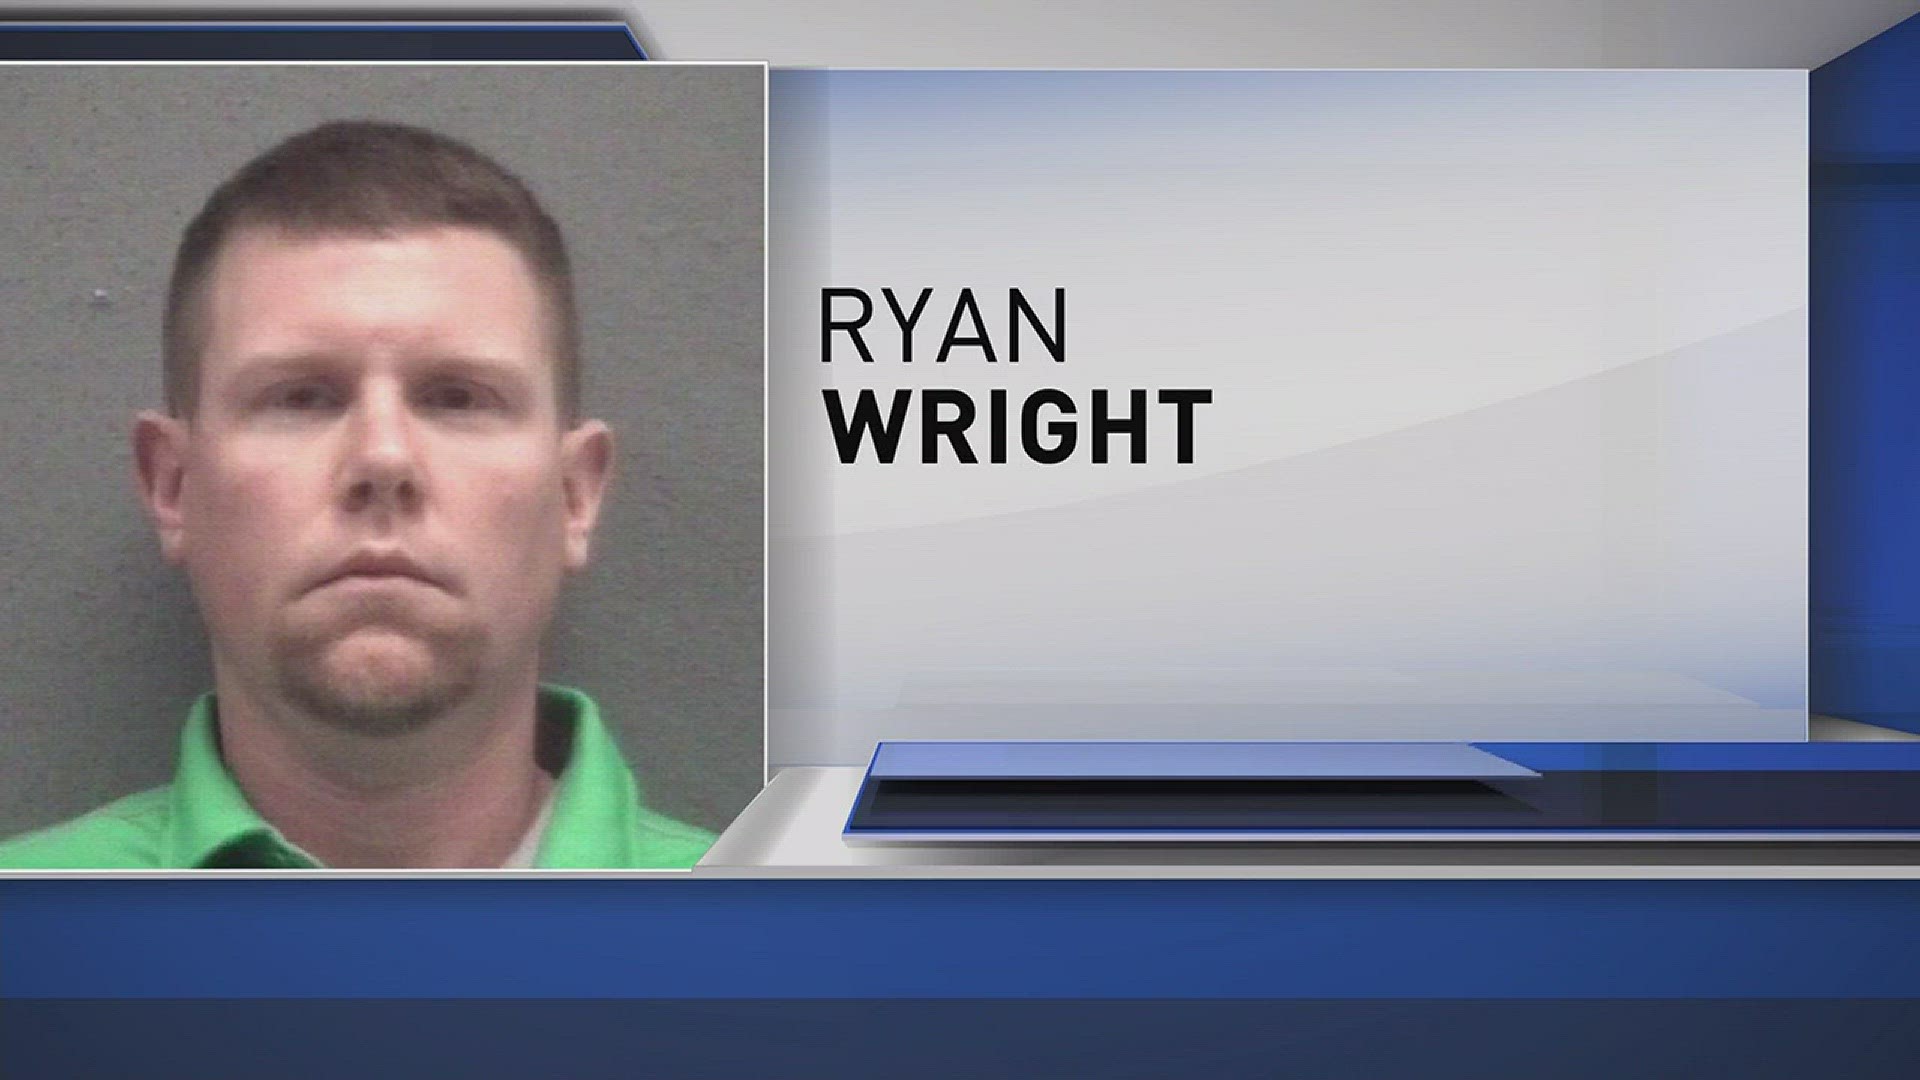 A high school teacher accused of having sex with a student has turned himself in to police.